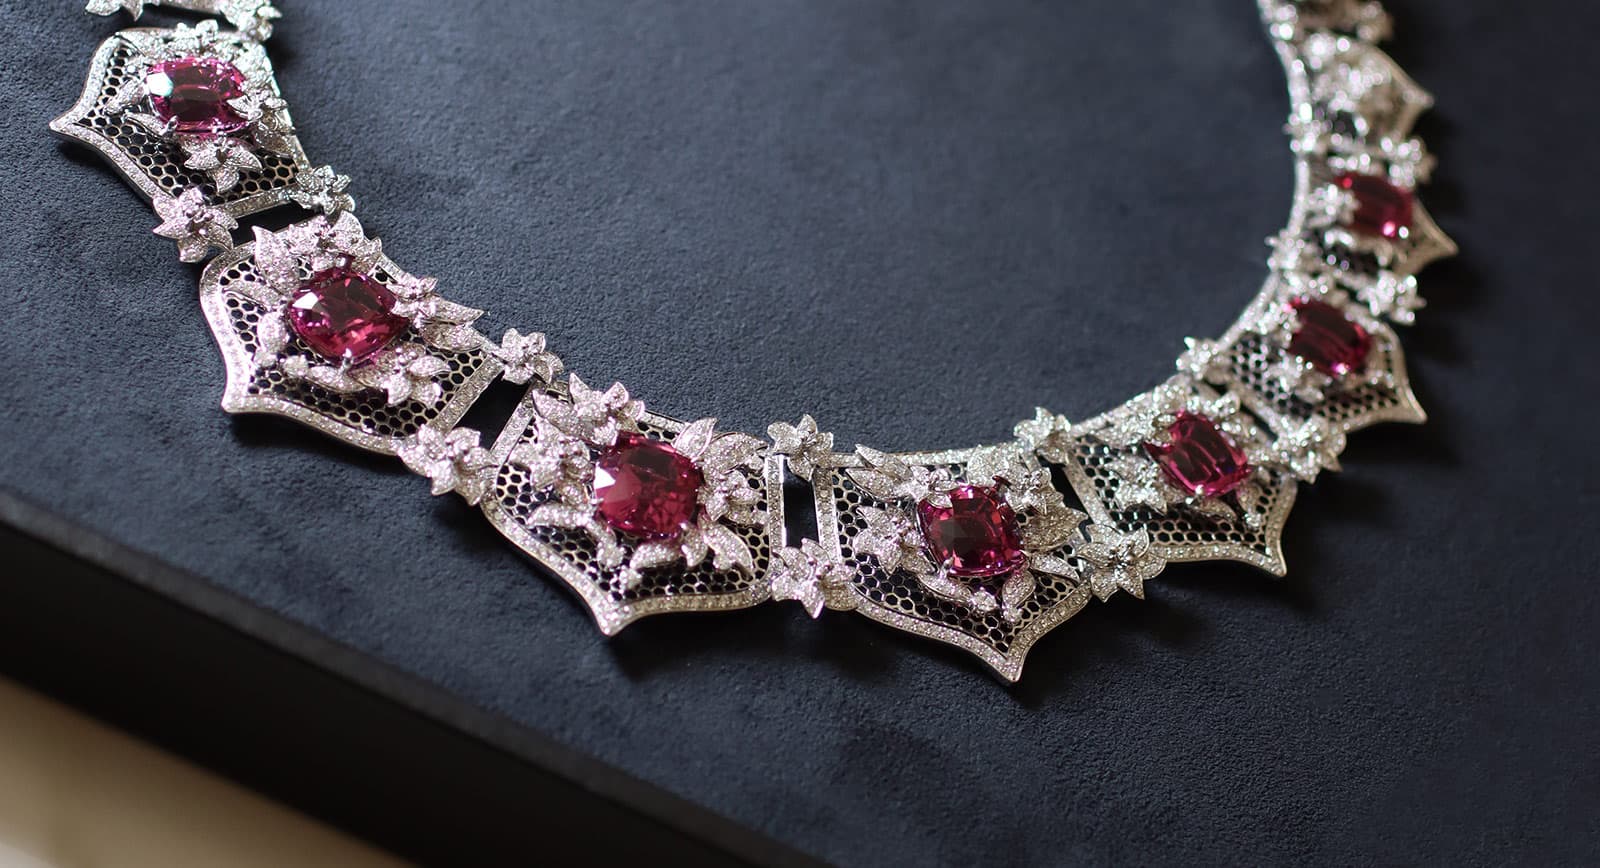 Serendipity Jewelry Secret d’Iris High Jewellery necklace with lace-effect goldwork and cushion-cut pink tourmalines requiring more than1,800 hours of work